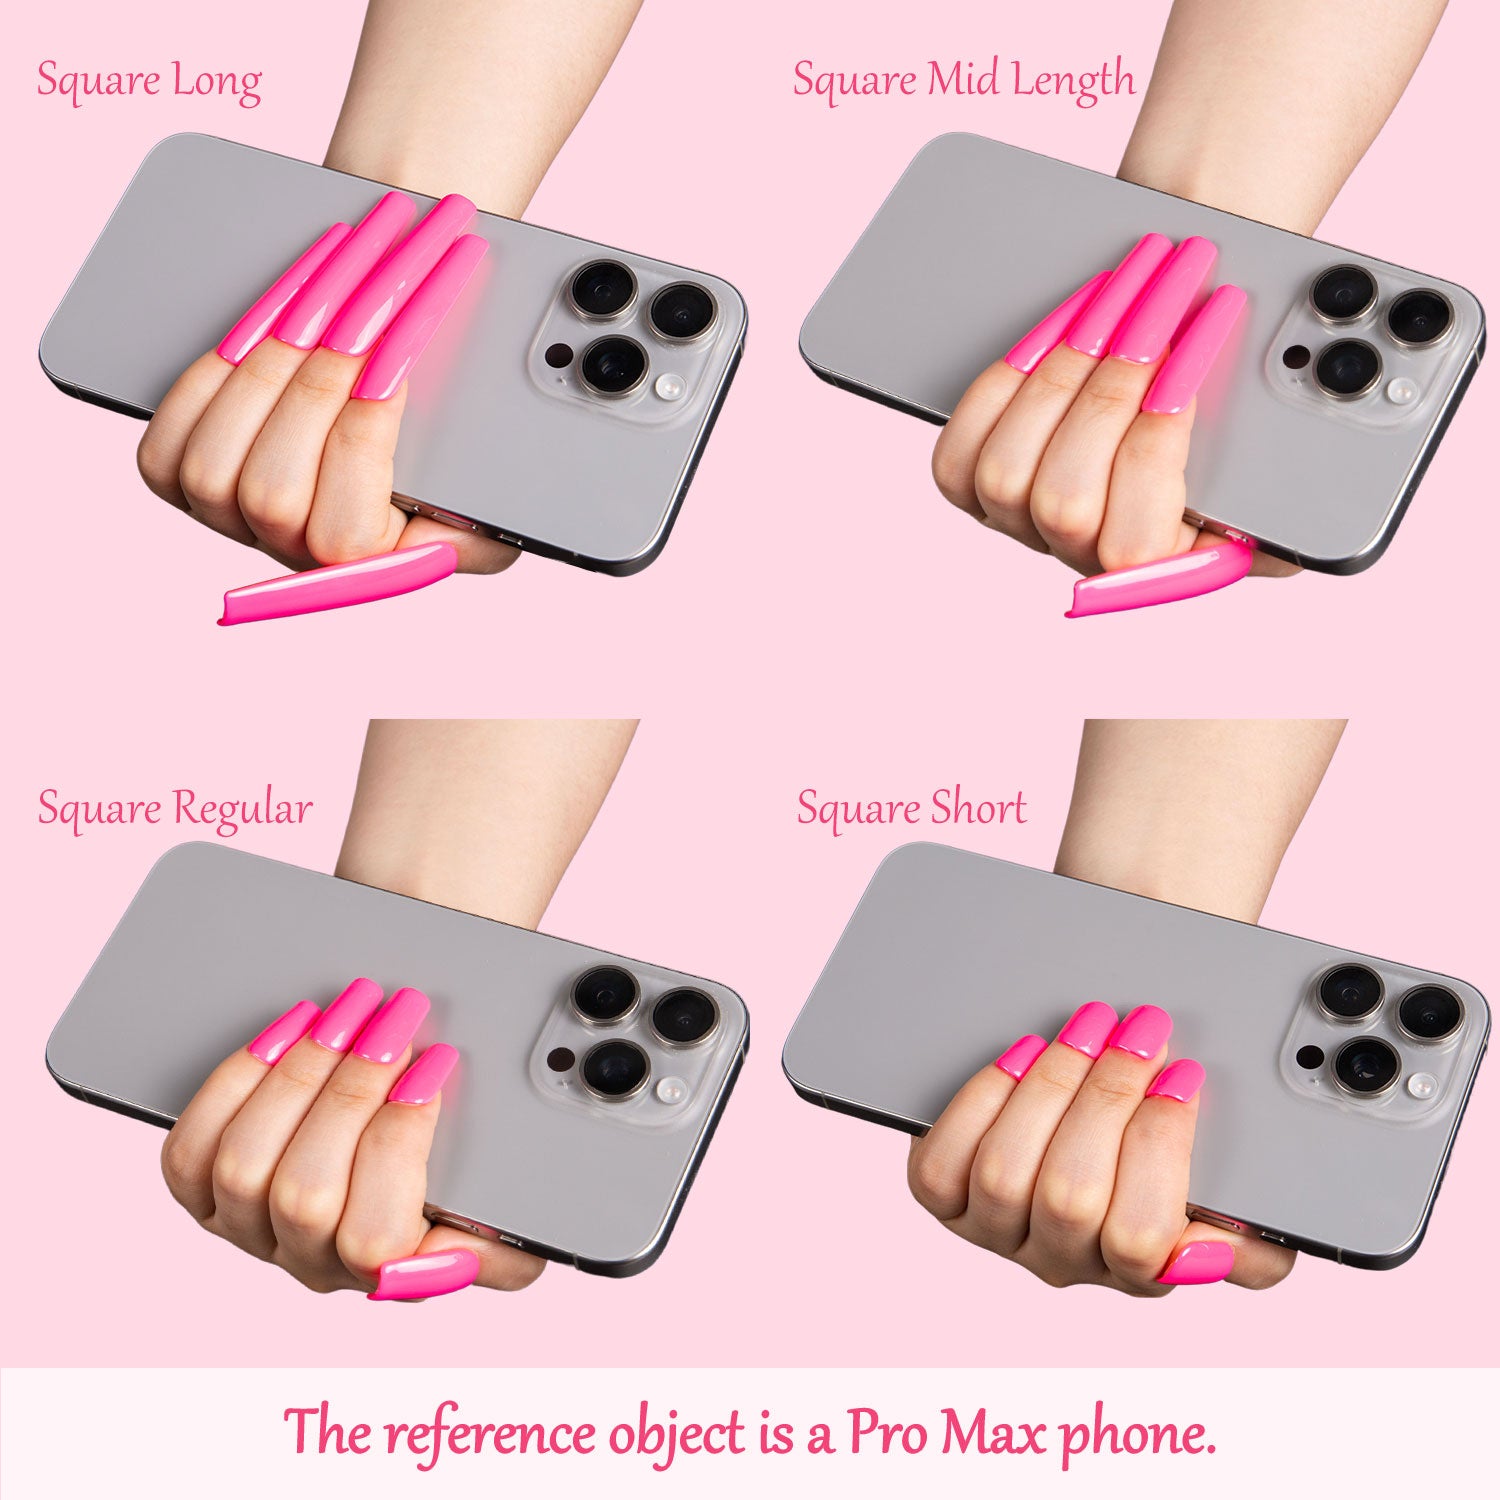 Comparison of four lengths of square-shaped, bright pink press-on acrylic nails from Lovful.com, each holding a gray iPhone Pro Max. Displayed lengths are Square Long, Square Mid Length, Square Regular, and Square Short. Reference object is a Pro Max phone.